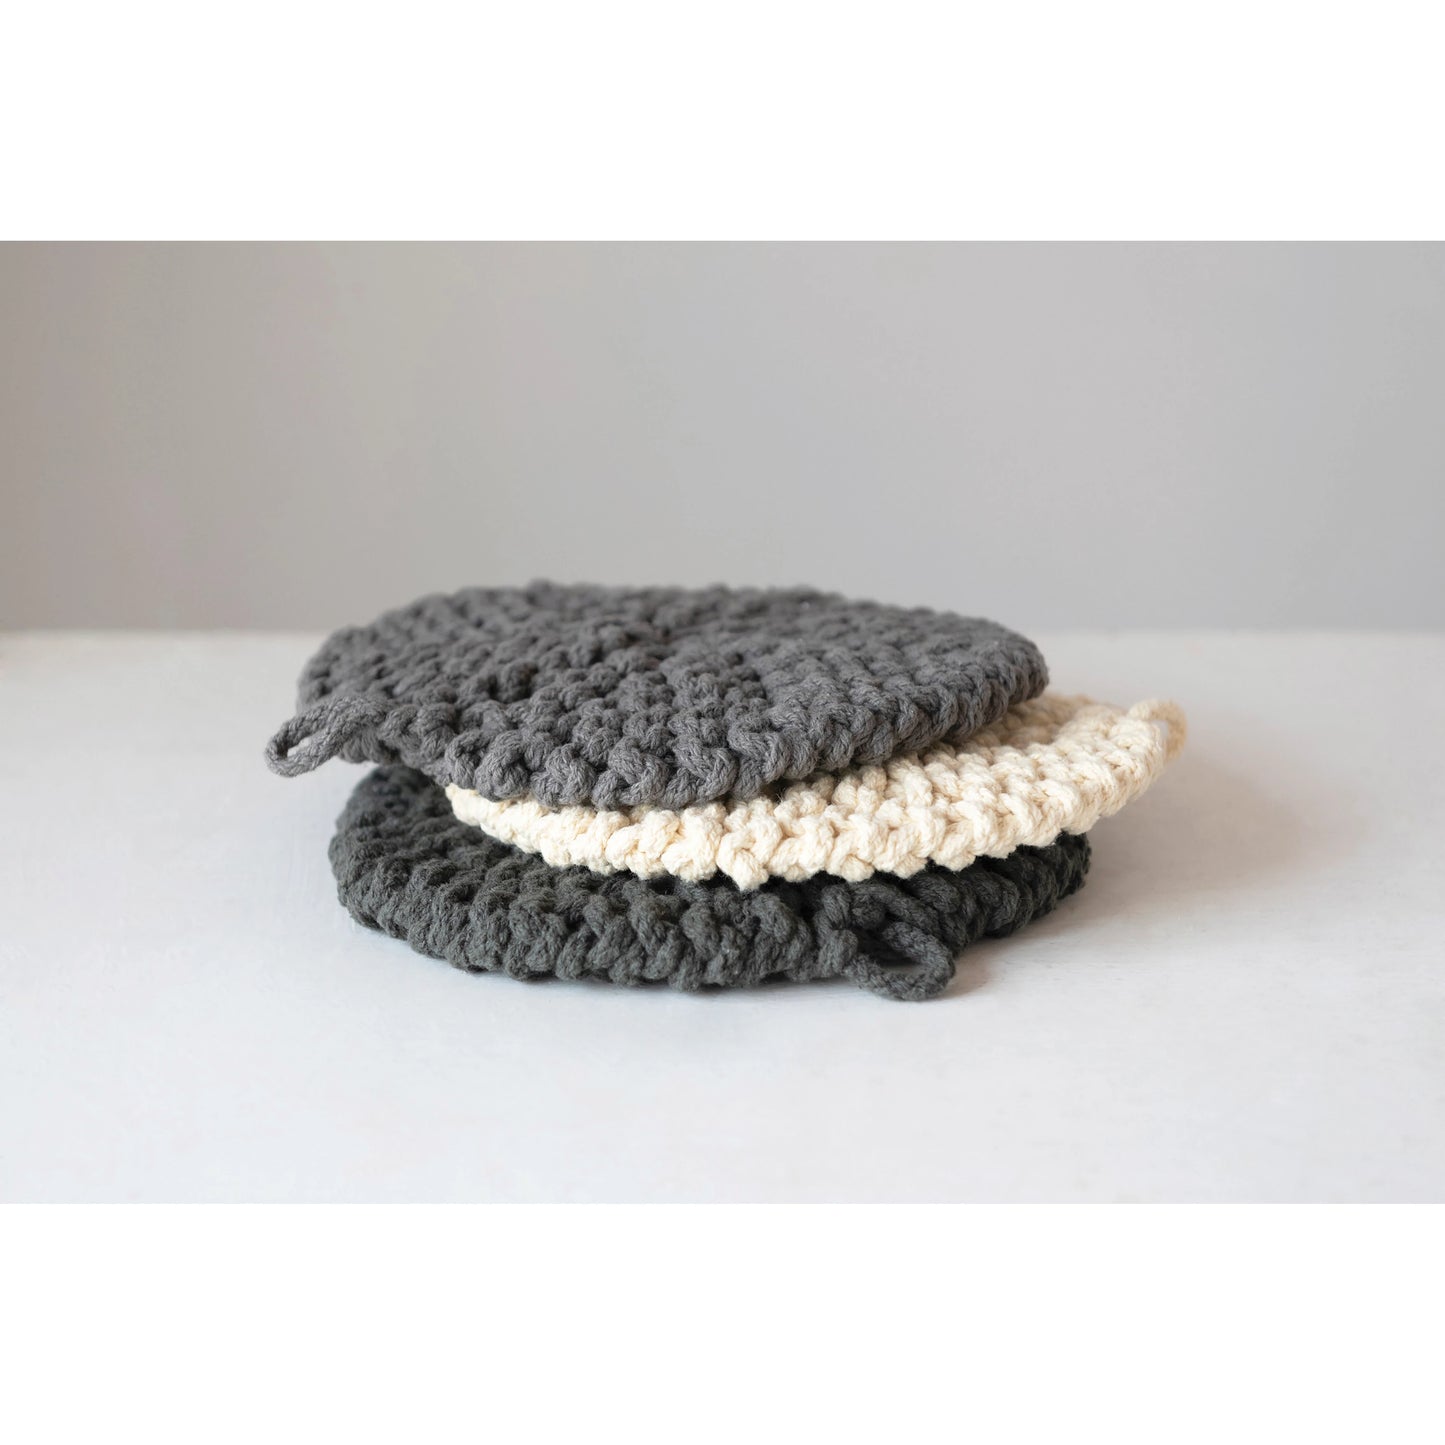 8" Round Cotton Crocheted Pot Holder, 3 Colors